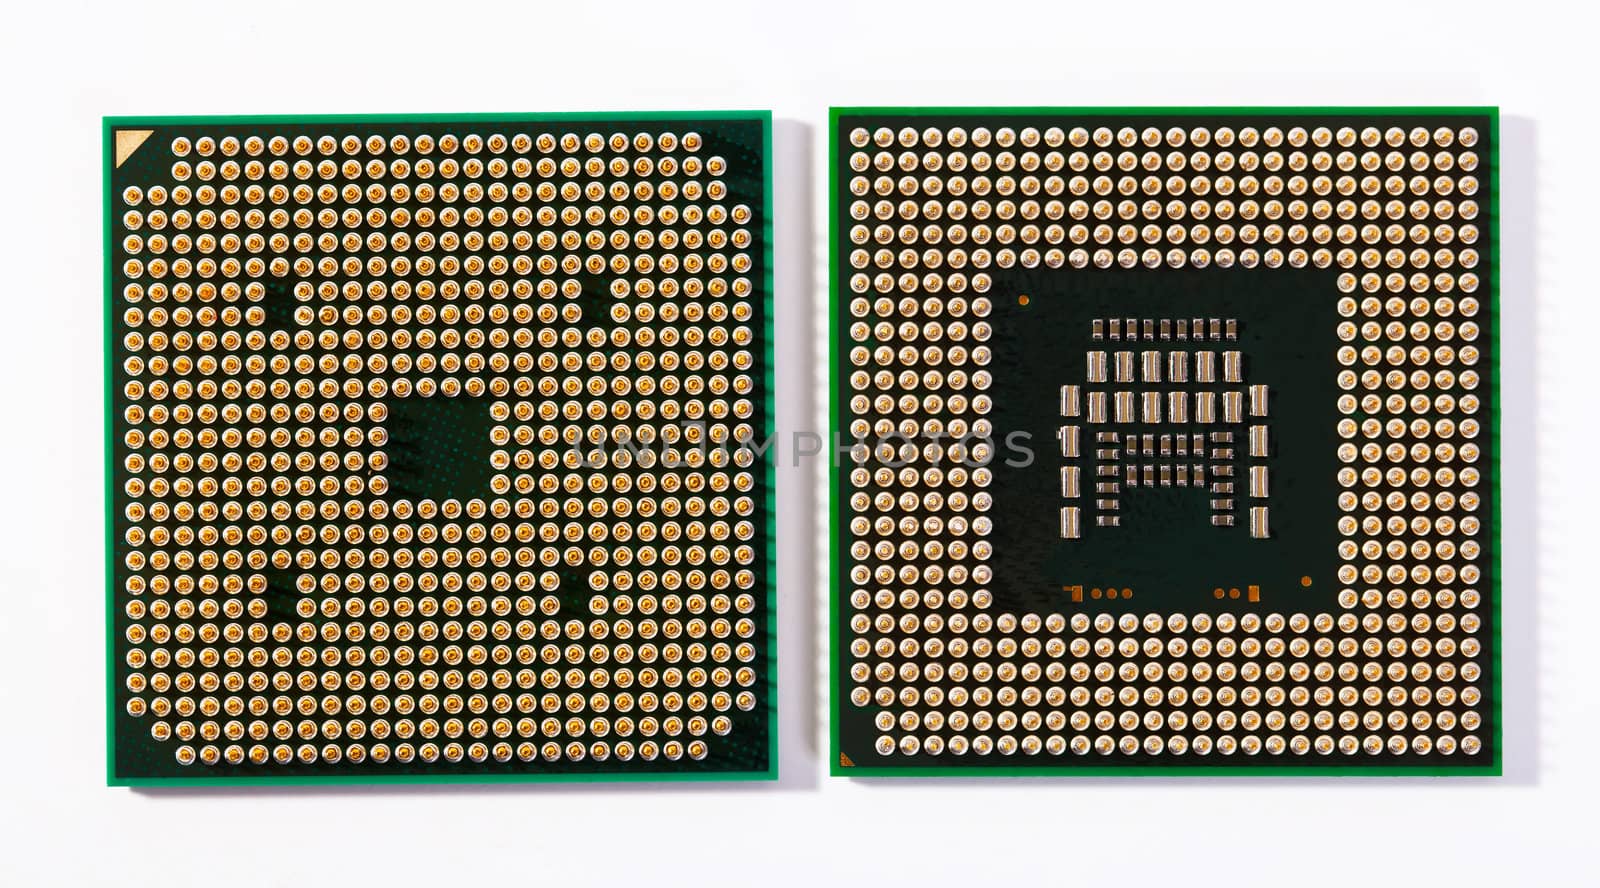 Two laptop processors on the white background